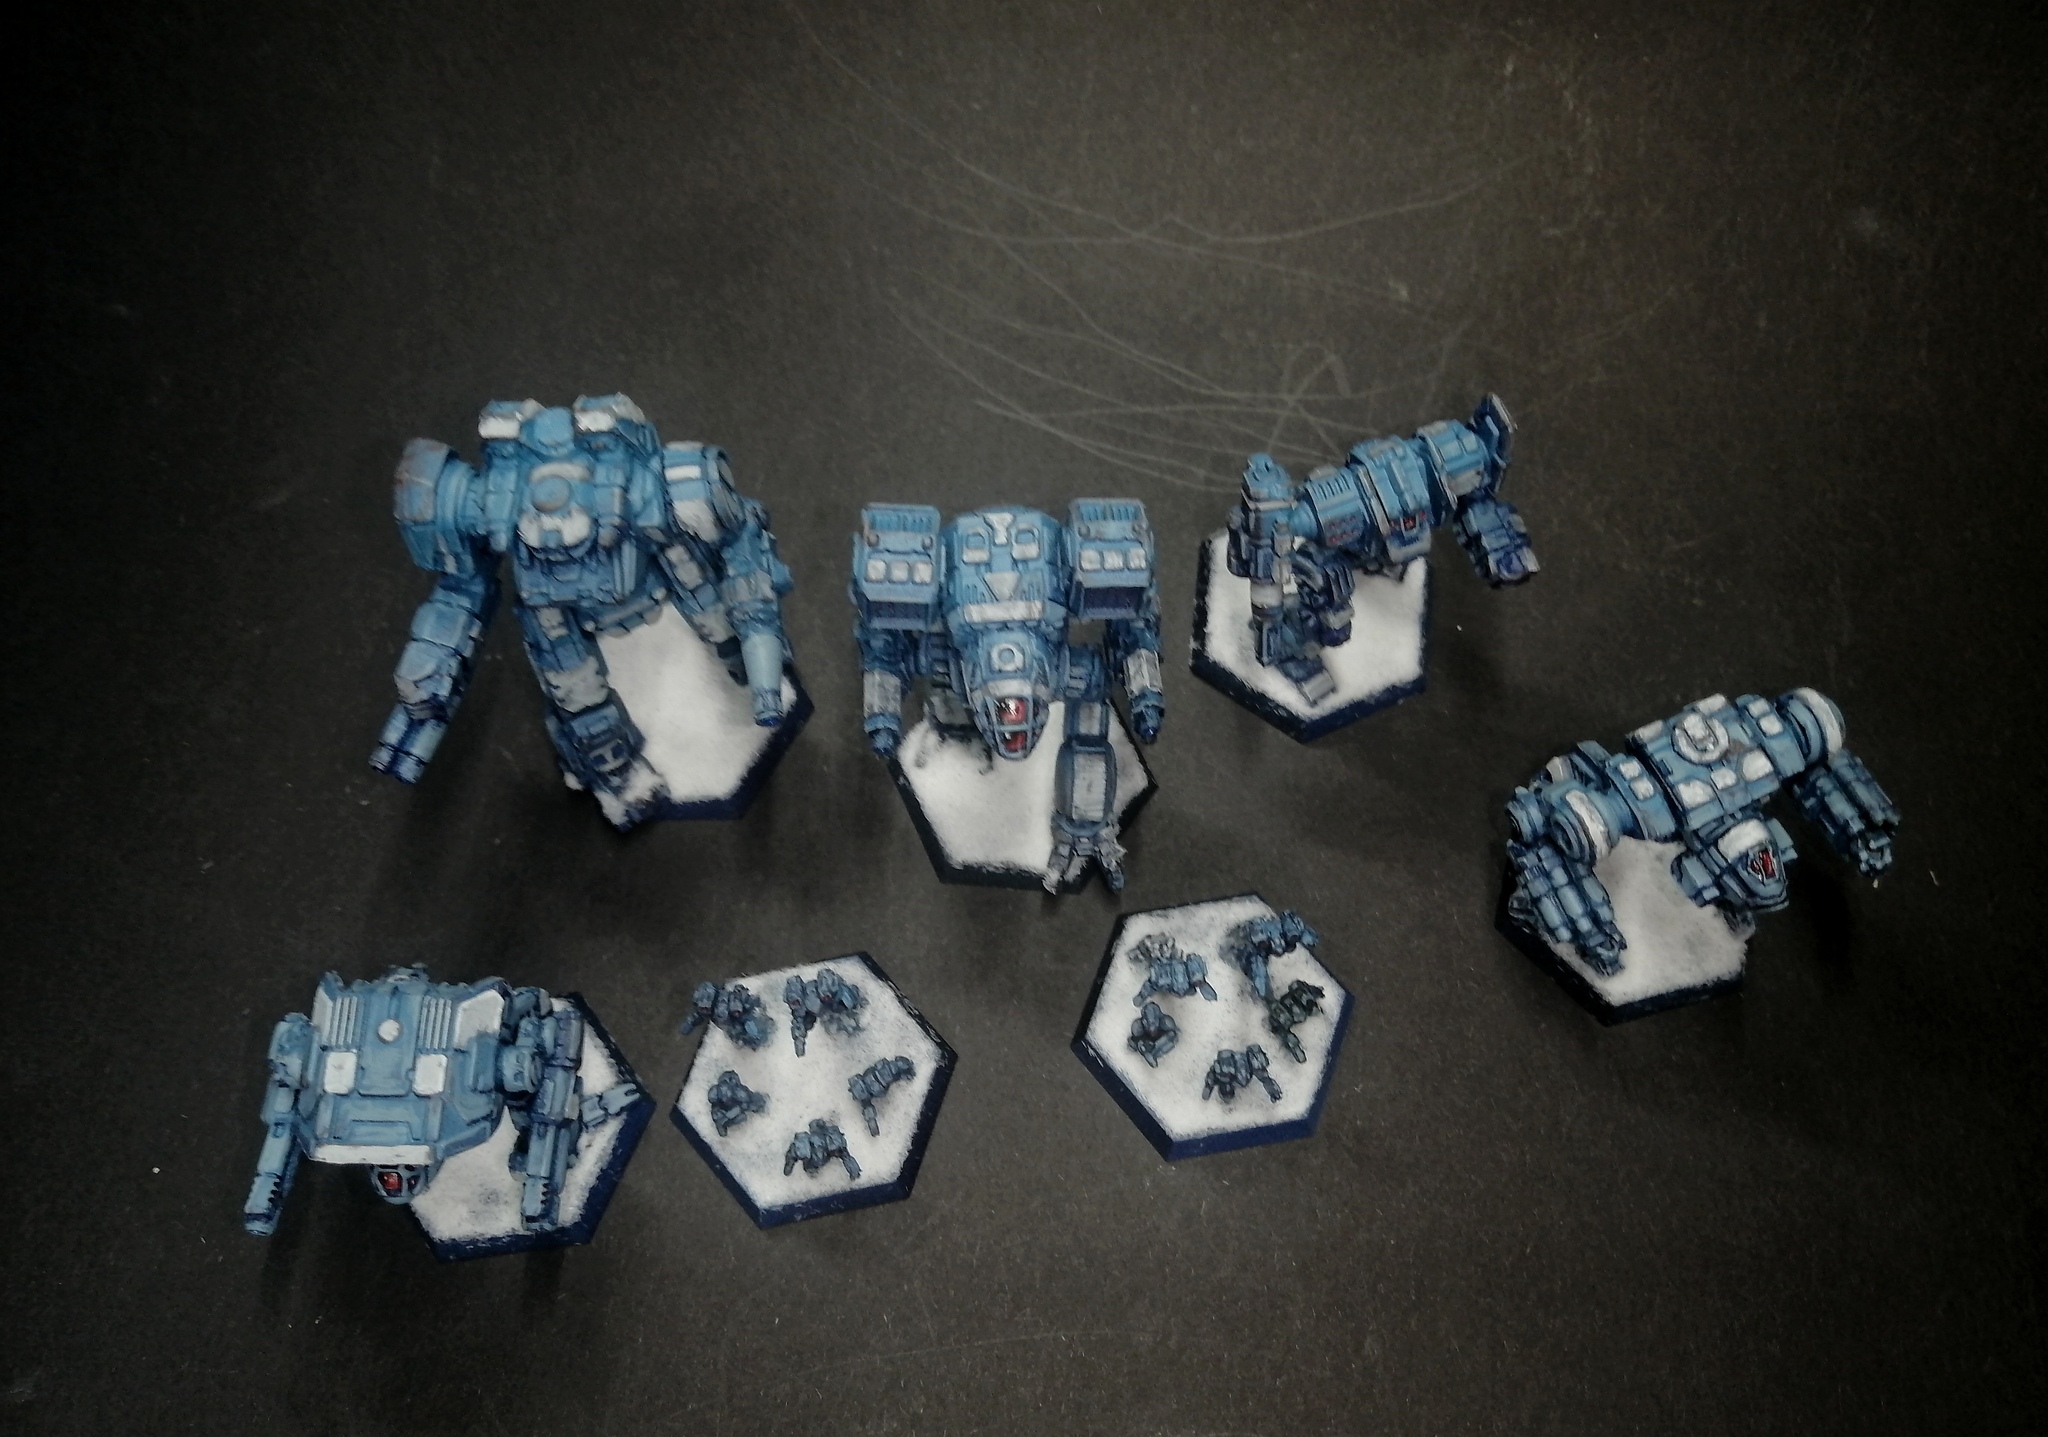 Clan Ghost Bear - My, Collection, Battletech, Modeling, Wargame, Collecting, Miniature, Board games, Longpost